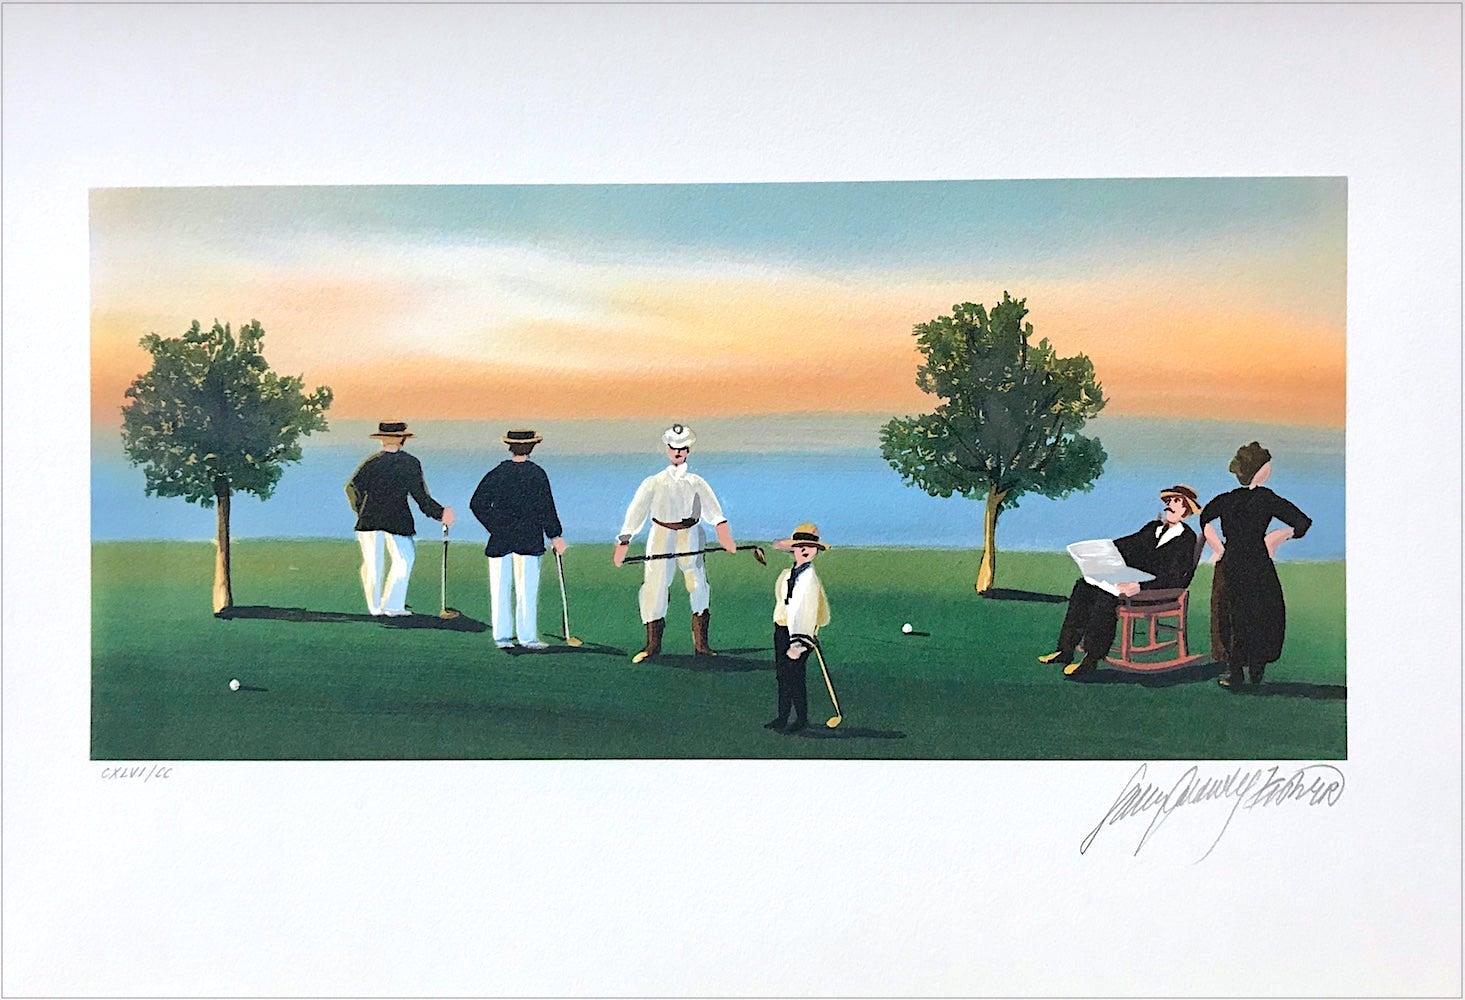 Sally Caldwell-Fisher Figurative Print - RUSTICATORS AT THE CLOSE OF DAY Signed Lithograph, New England Golfers, Sunset